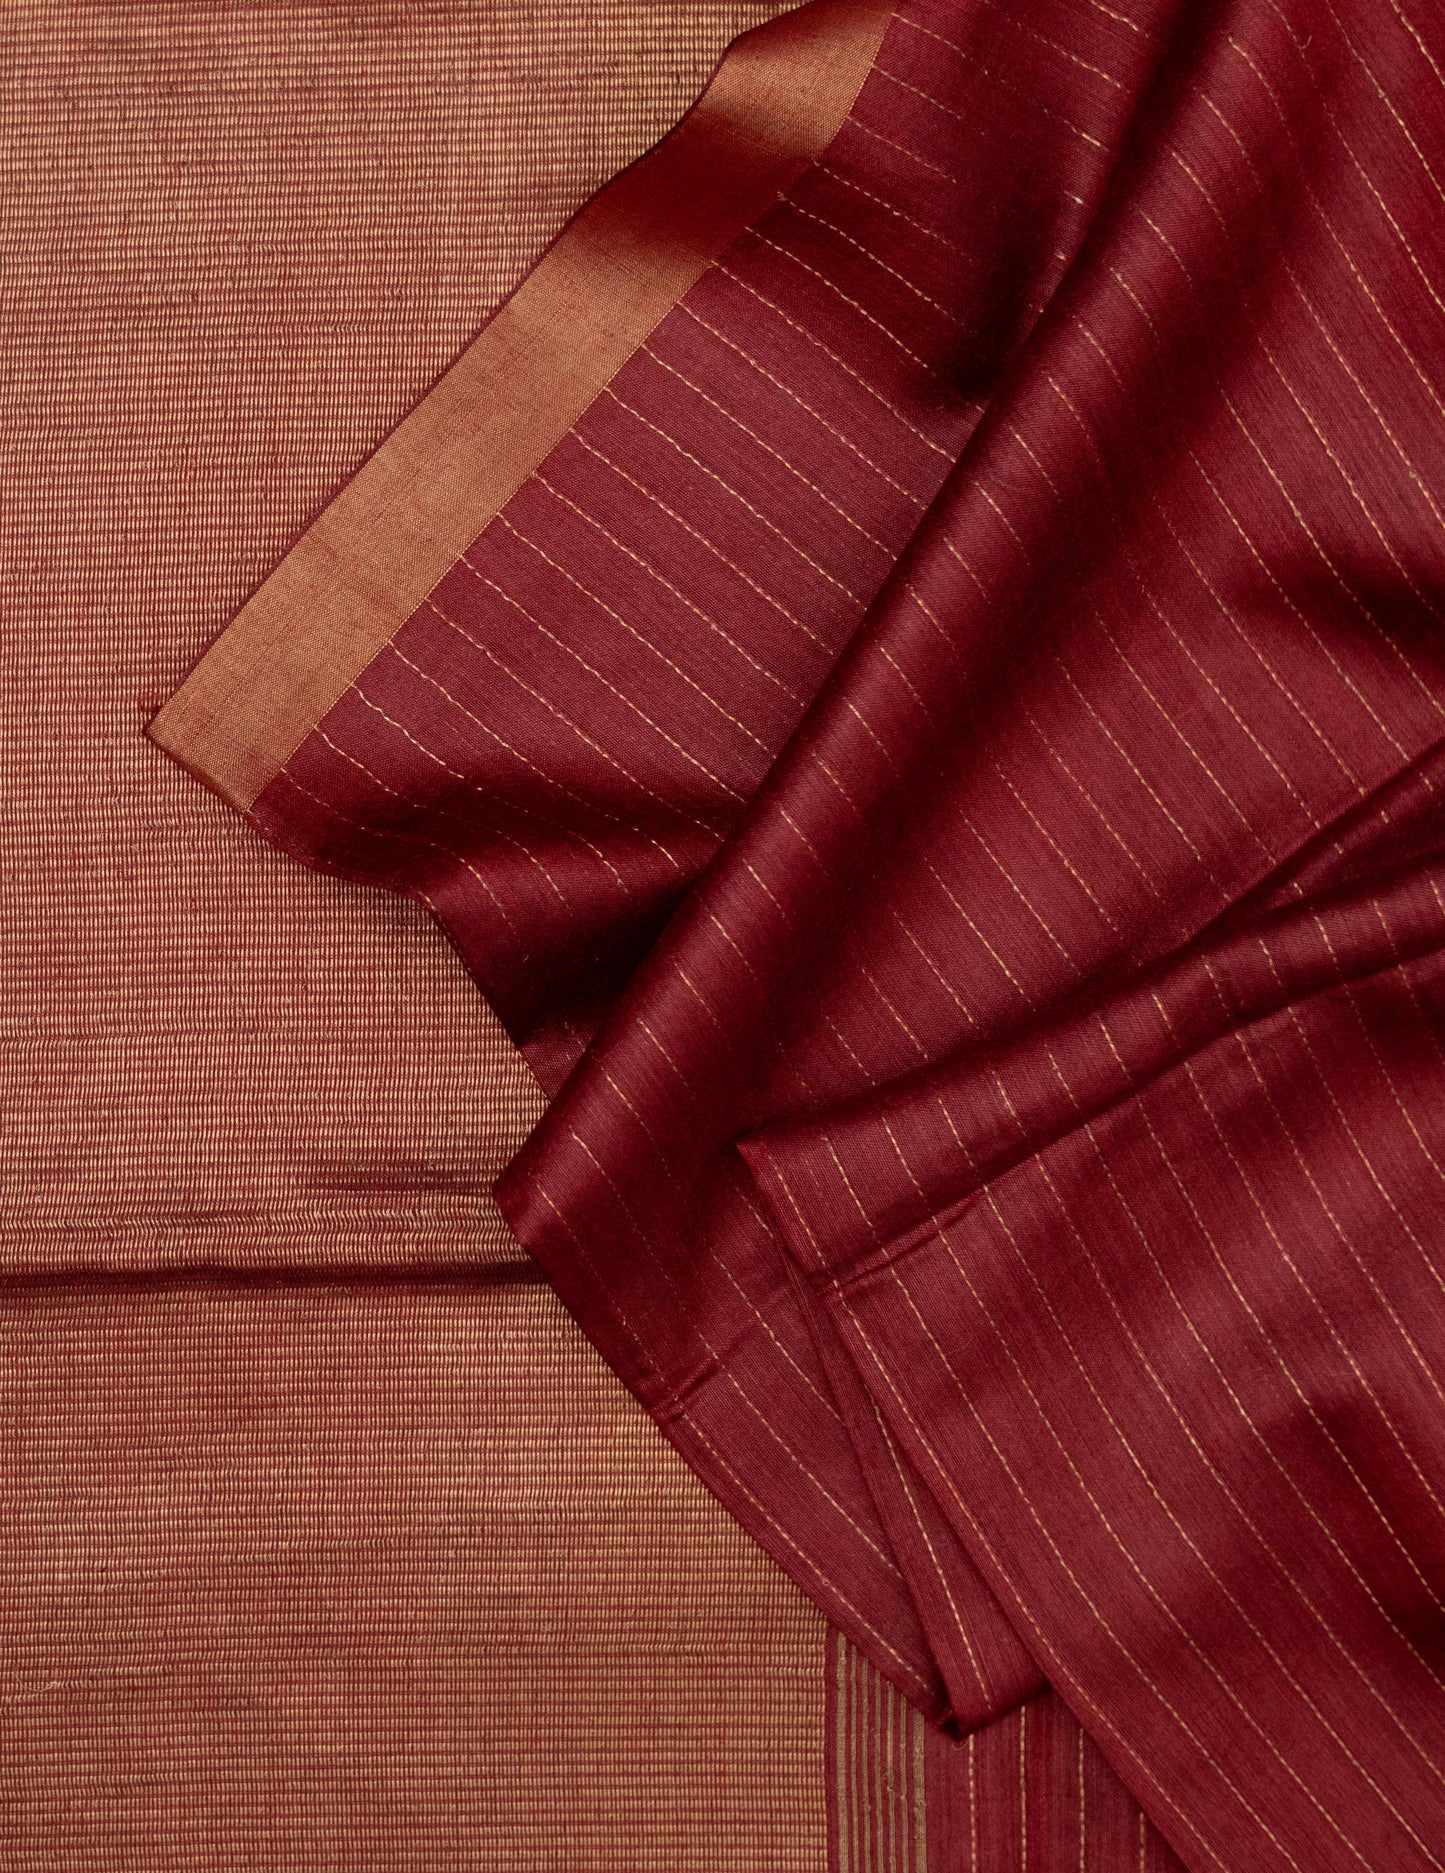 Handwoven Pure Tussar Soft Silk Saree in Brown color